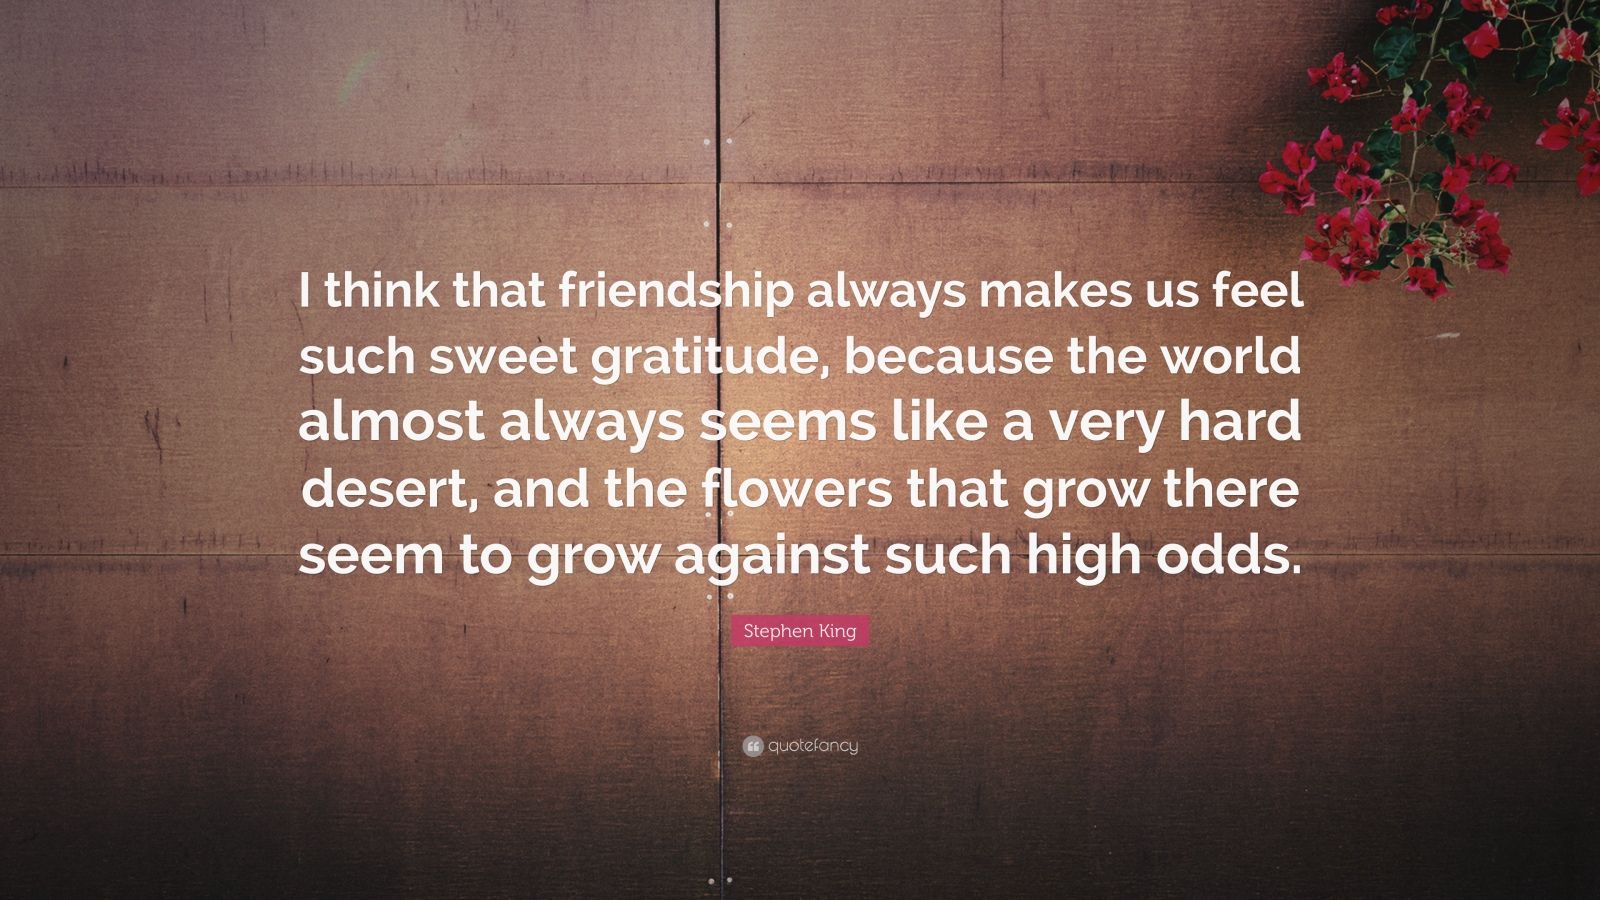 Stephen King Quote: “I think that friendship always makes us feel ...